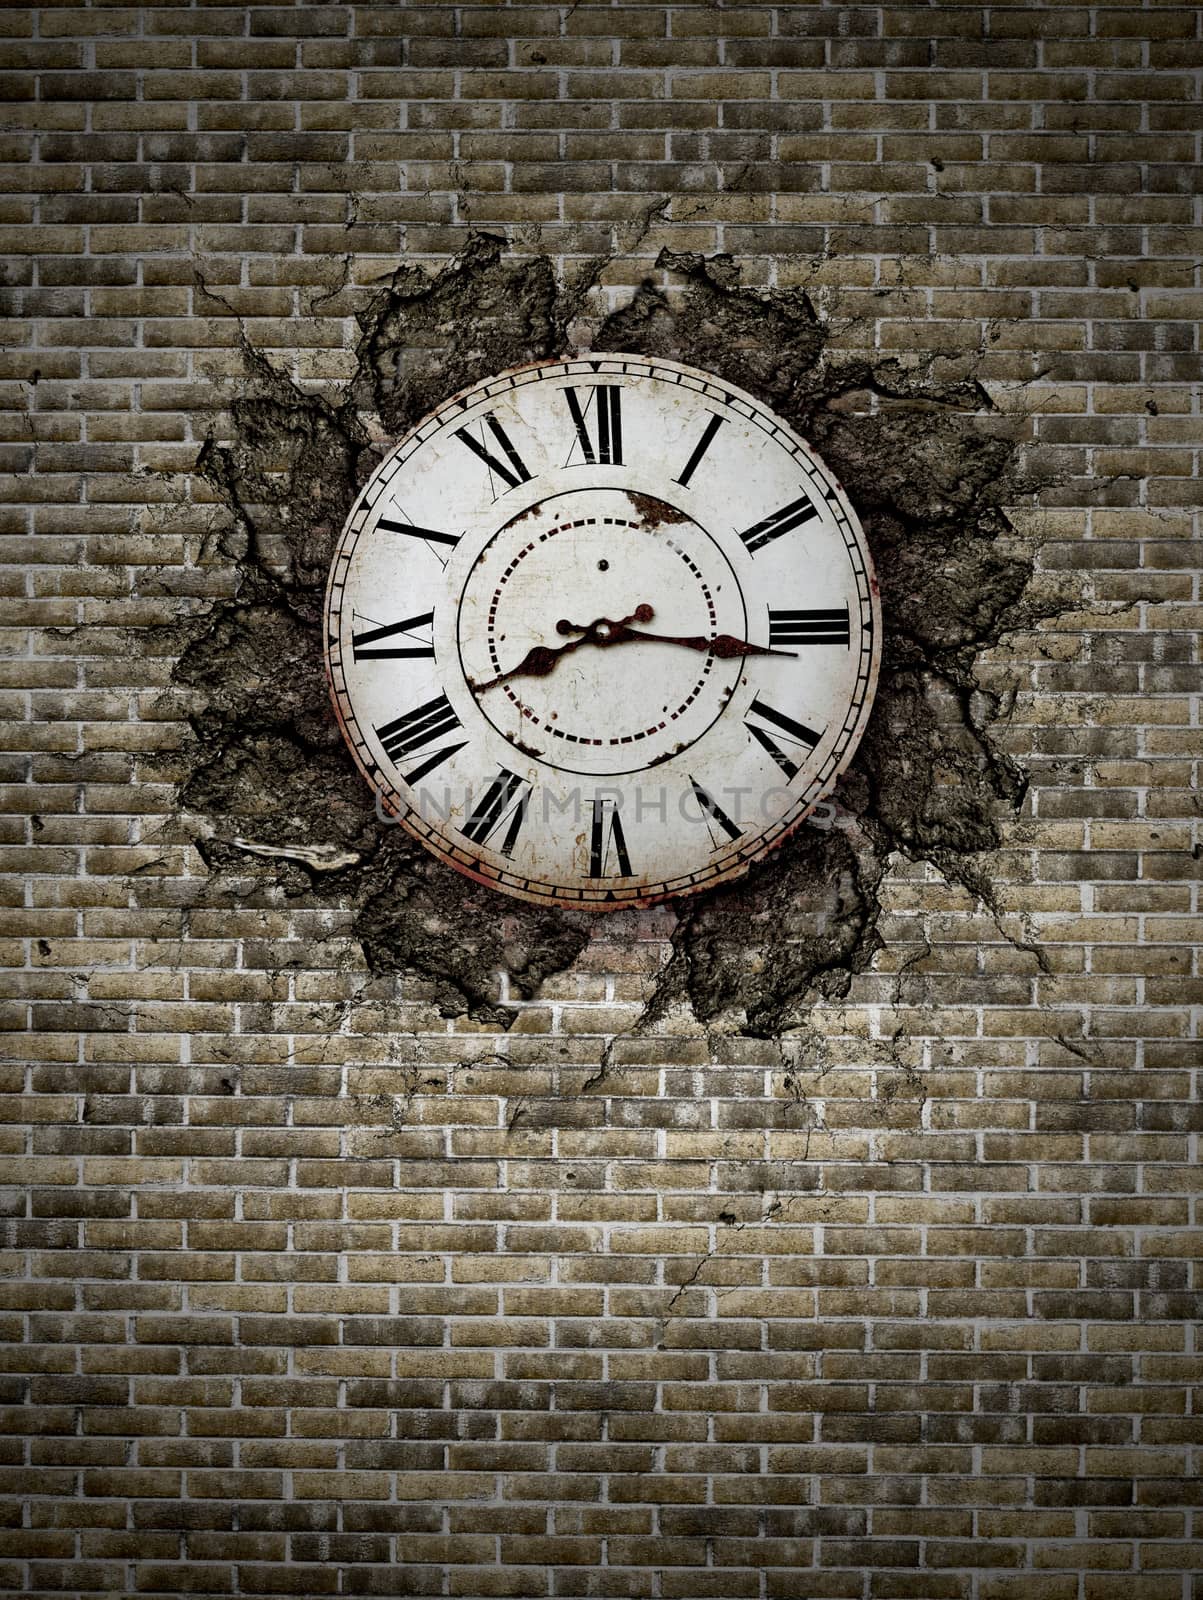 old vintage clock on a brick wall